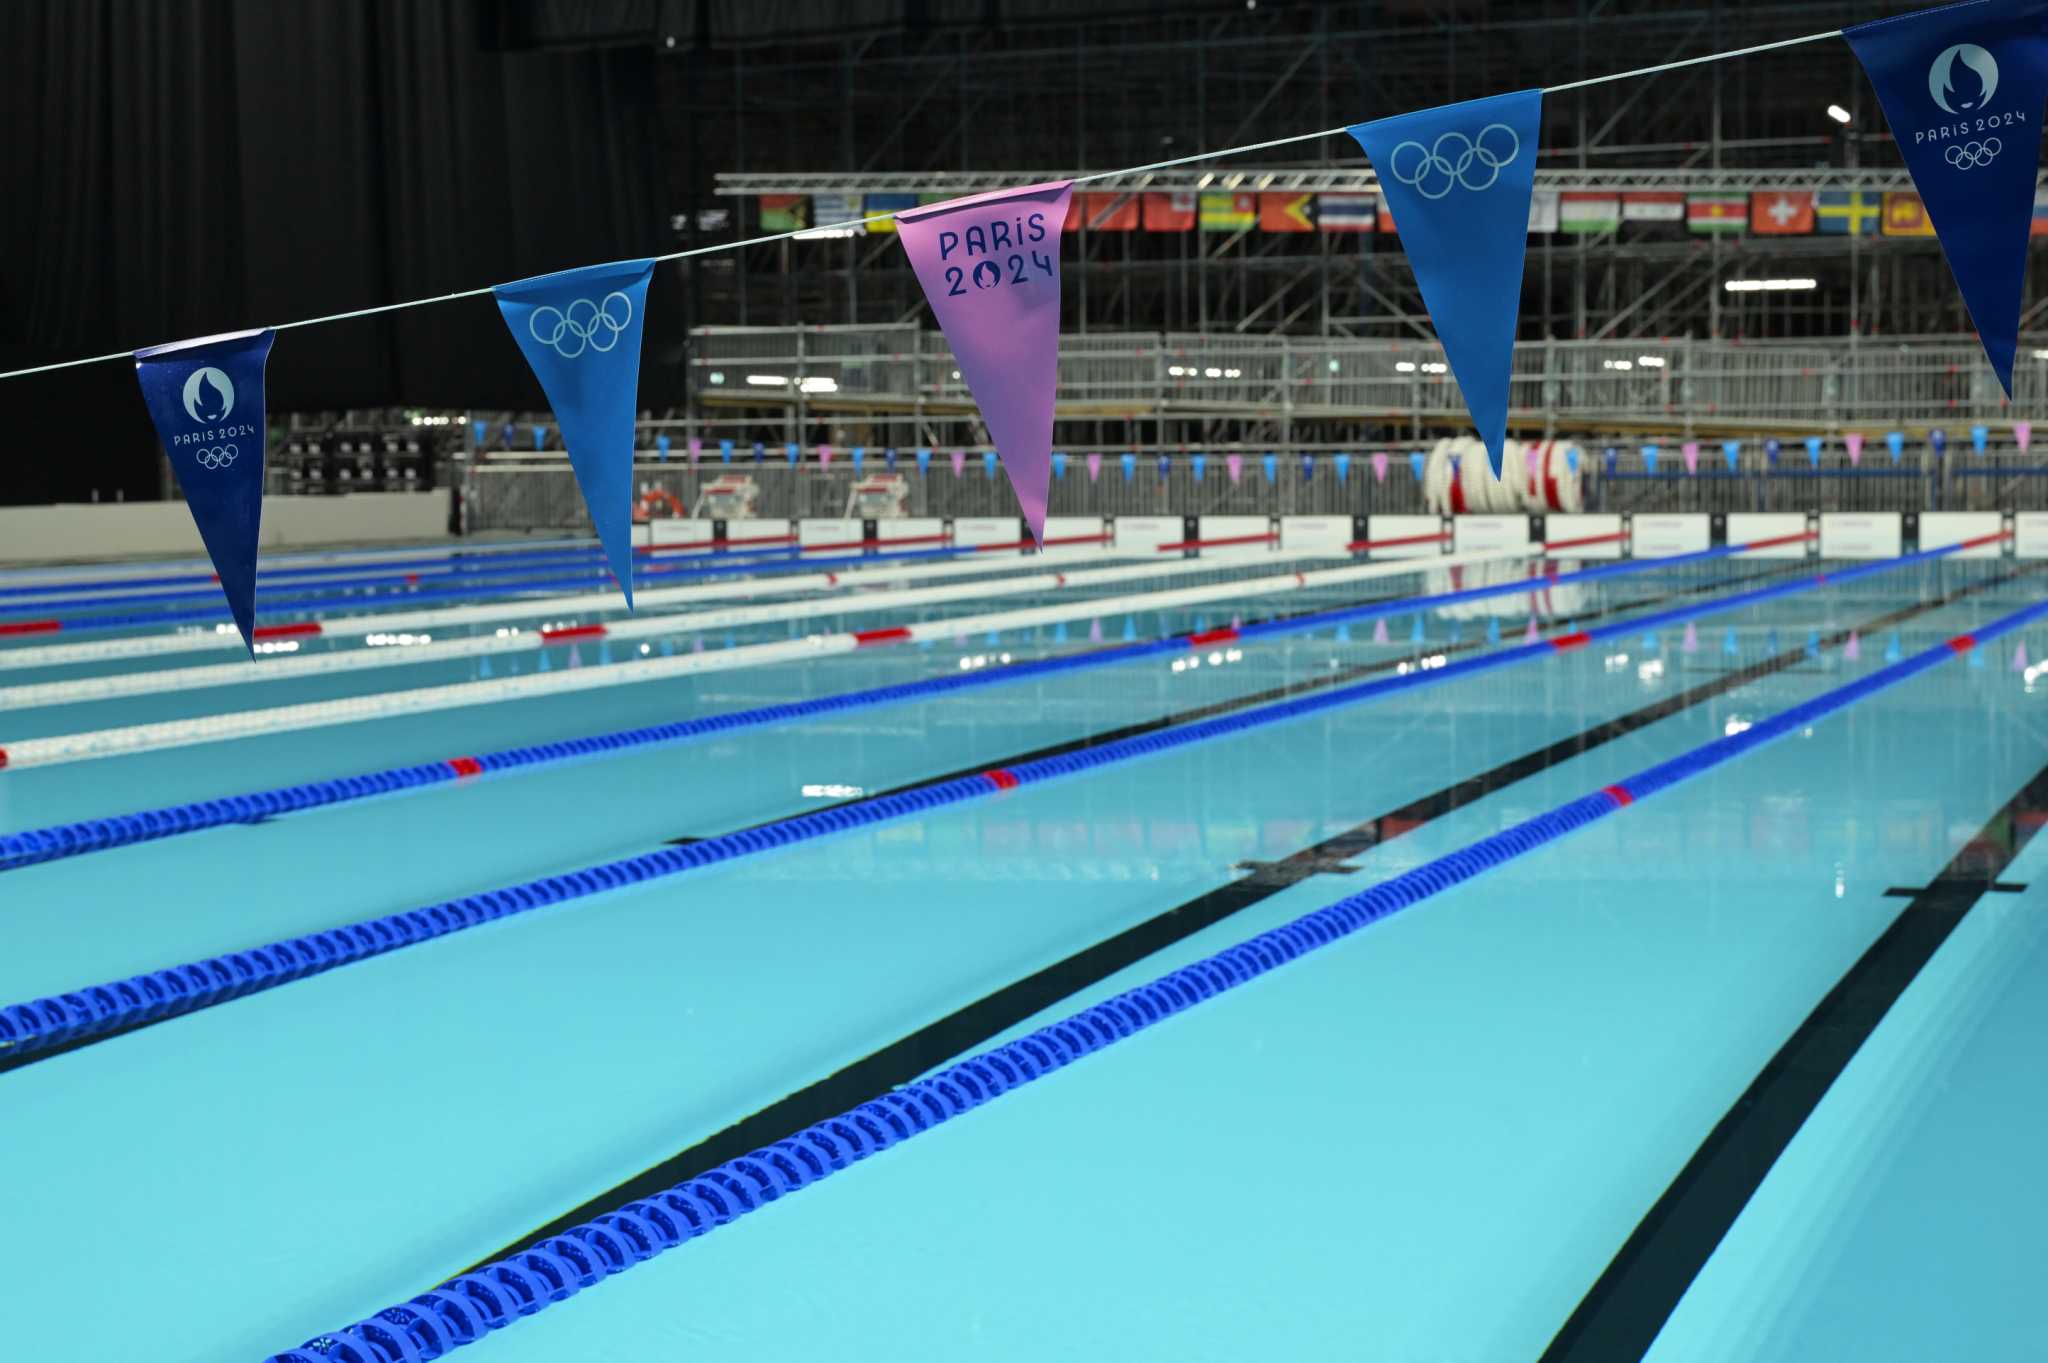 World swimming body promises more anti-doping tests of Chinese team before Paris Olympics